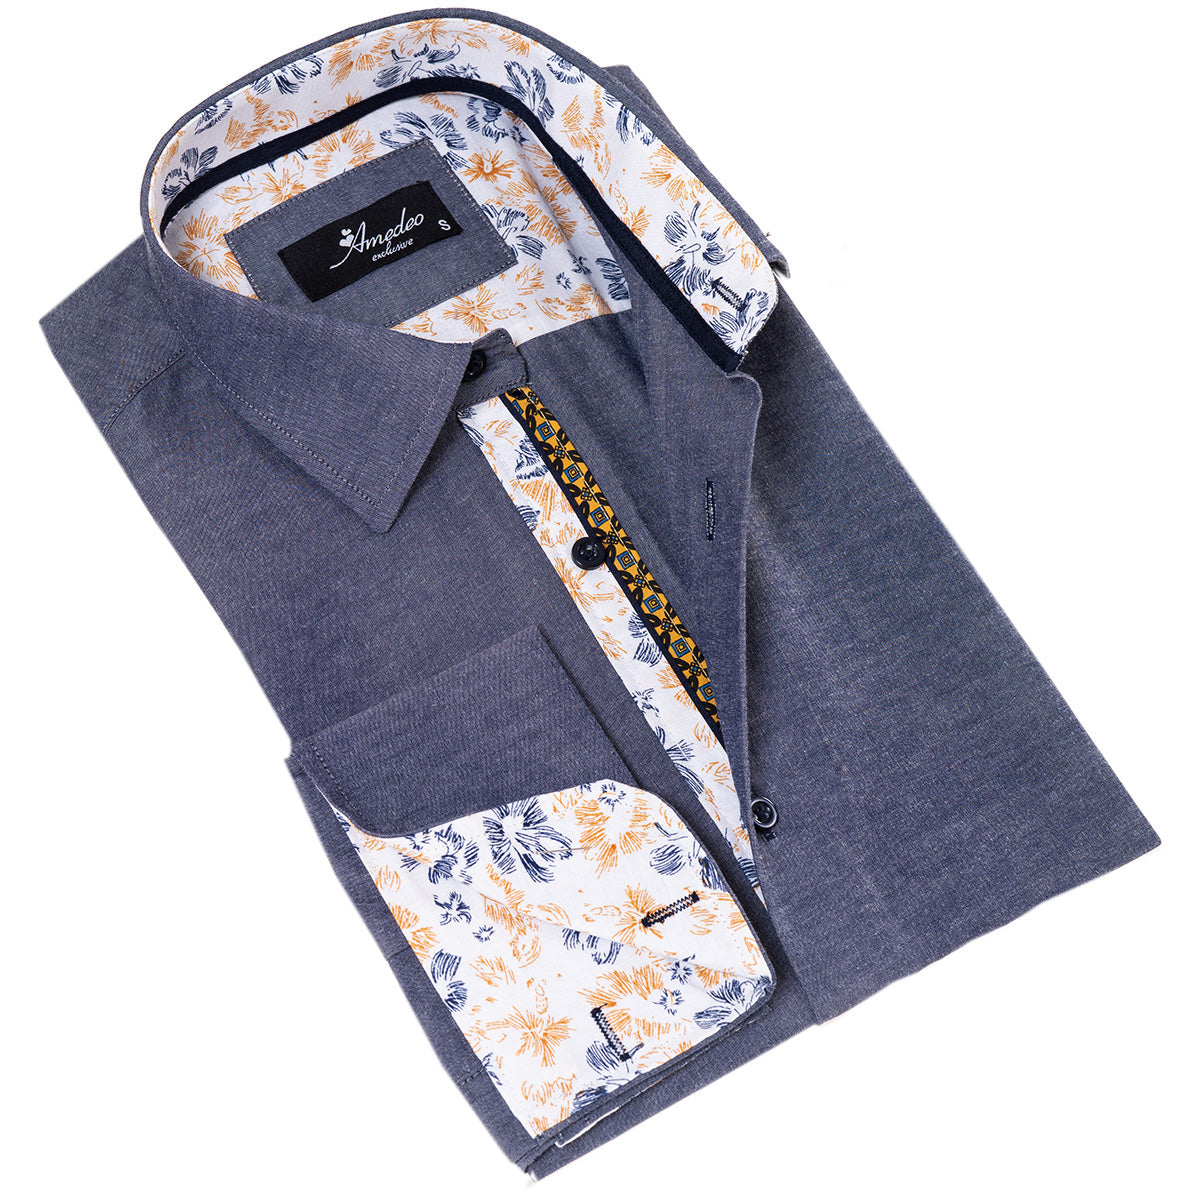 Bluish inside Floral Mens Slim Fit Designer French Cuff Shirt - tailored Cotton Shirts for Work and Casual Wear